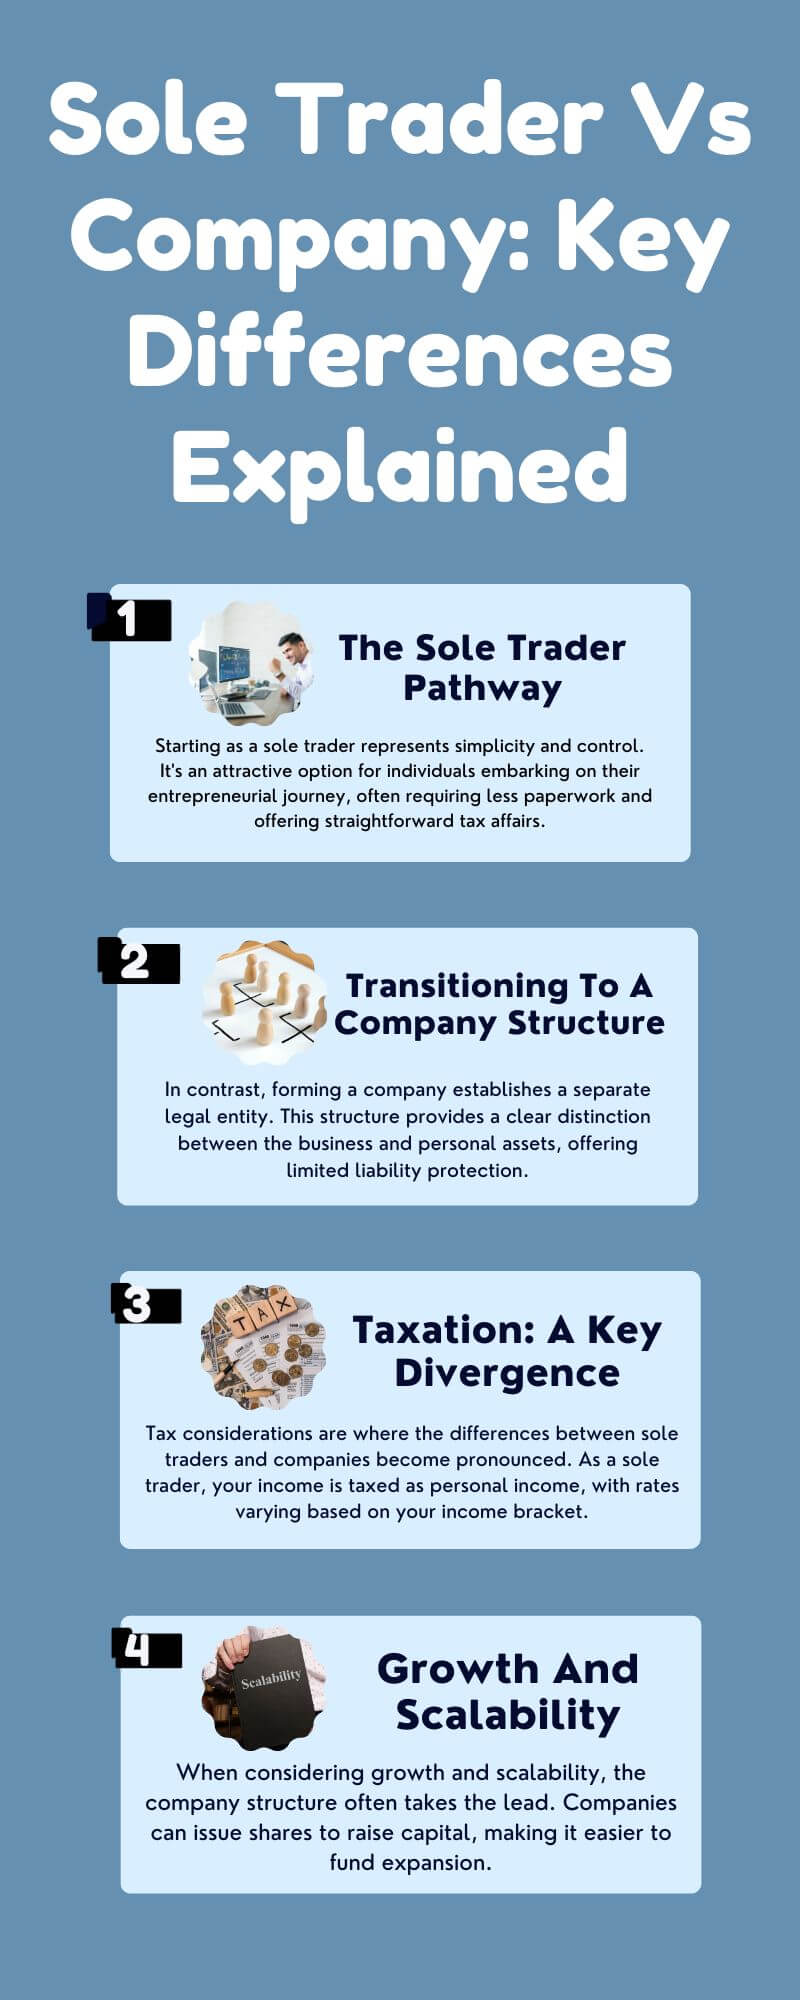 Sole Trader Vs Company: Key Differences Explained